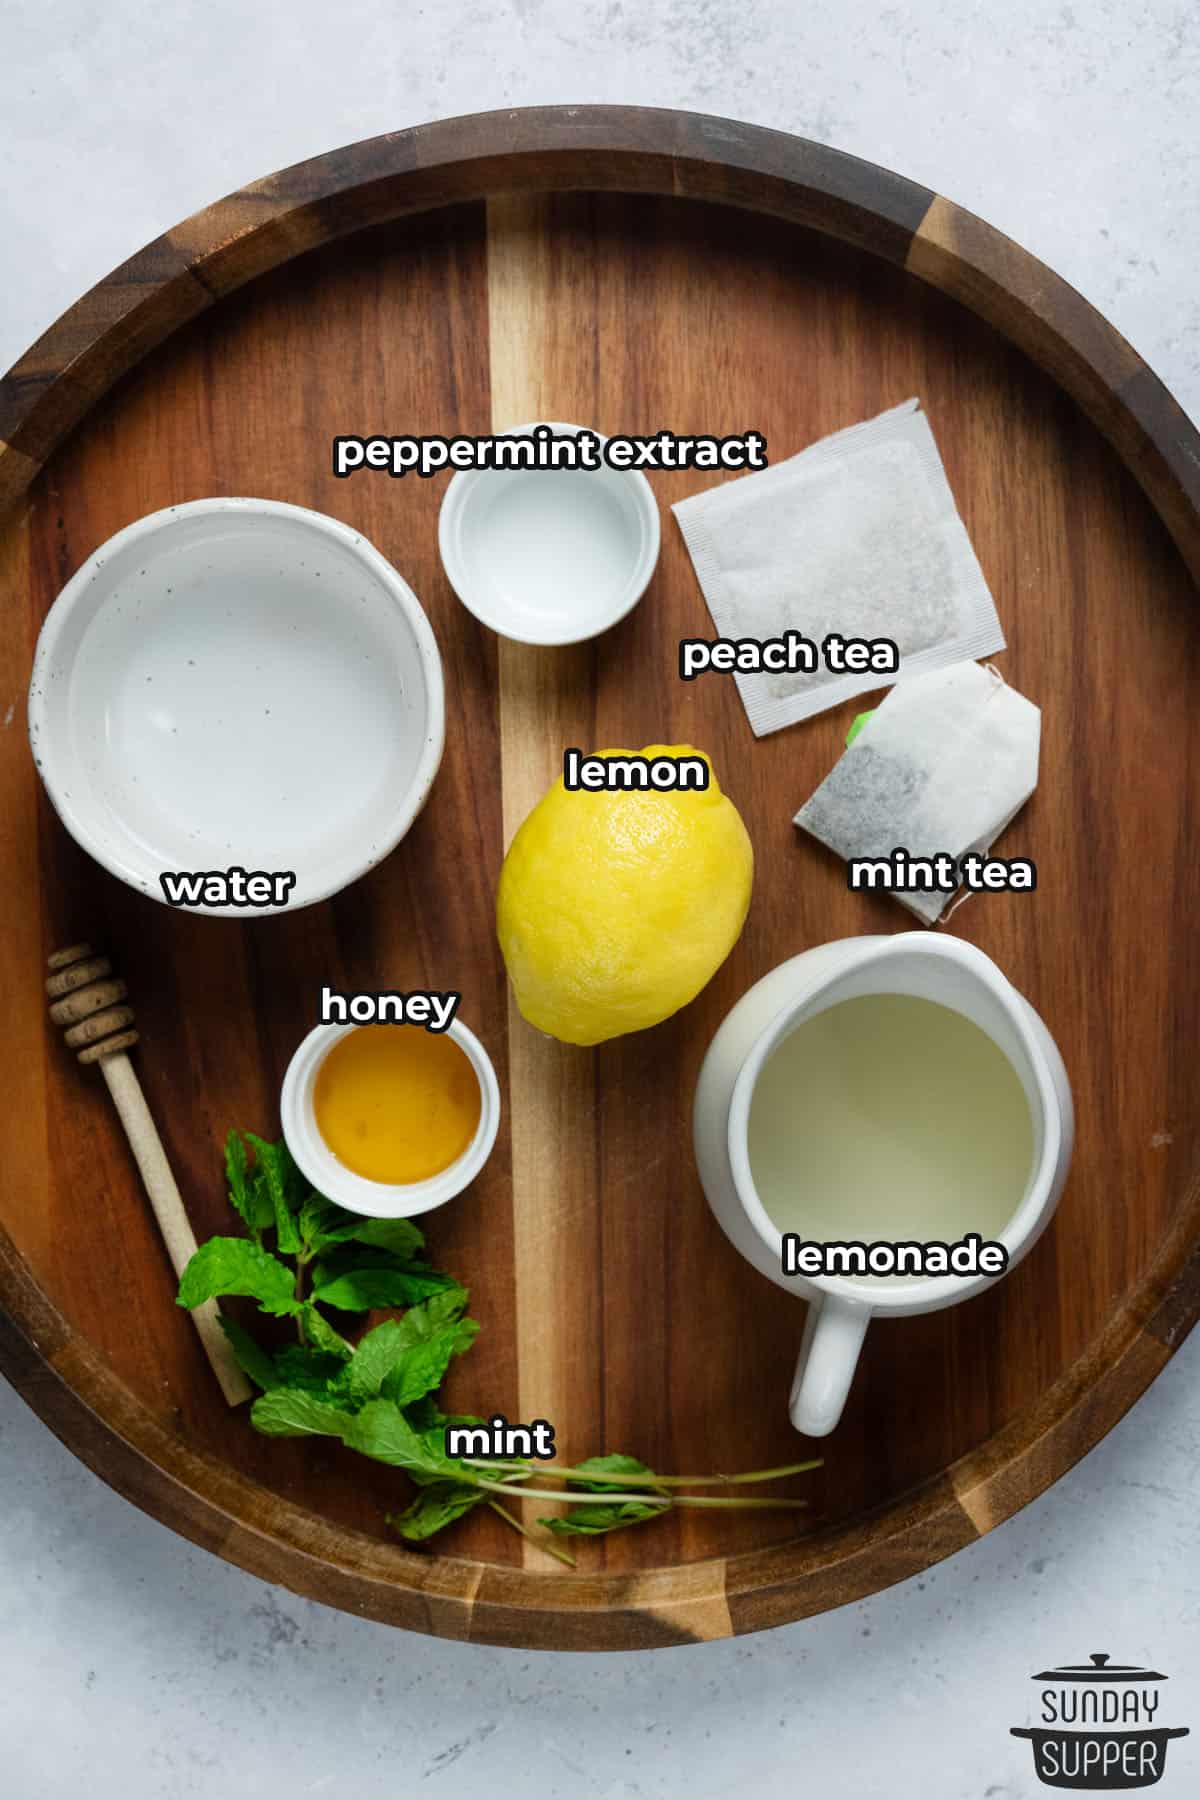 ingredients for starbucks medicine ball with labels on a wooden board